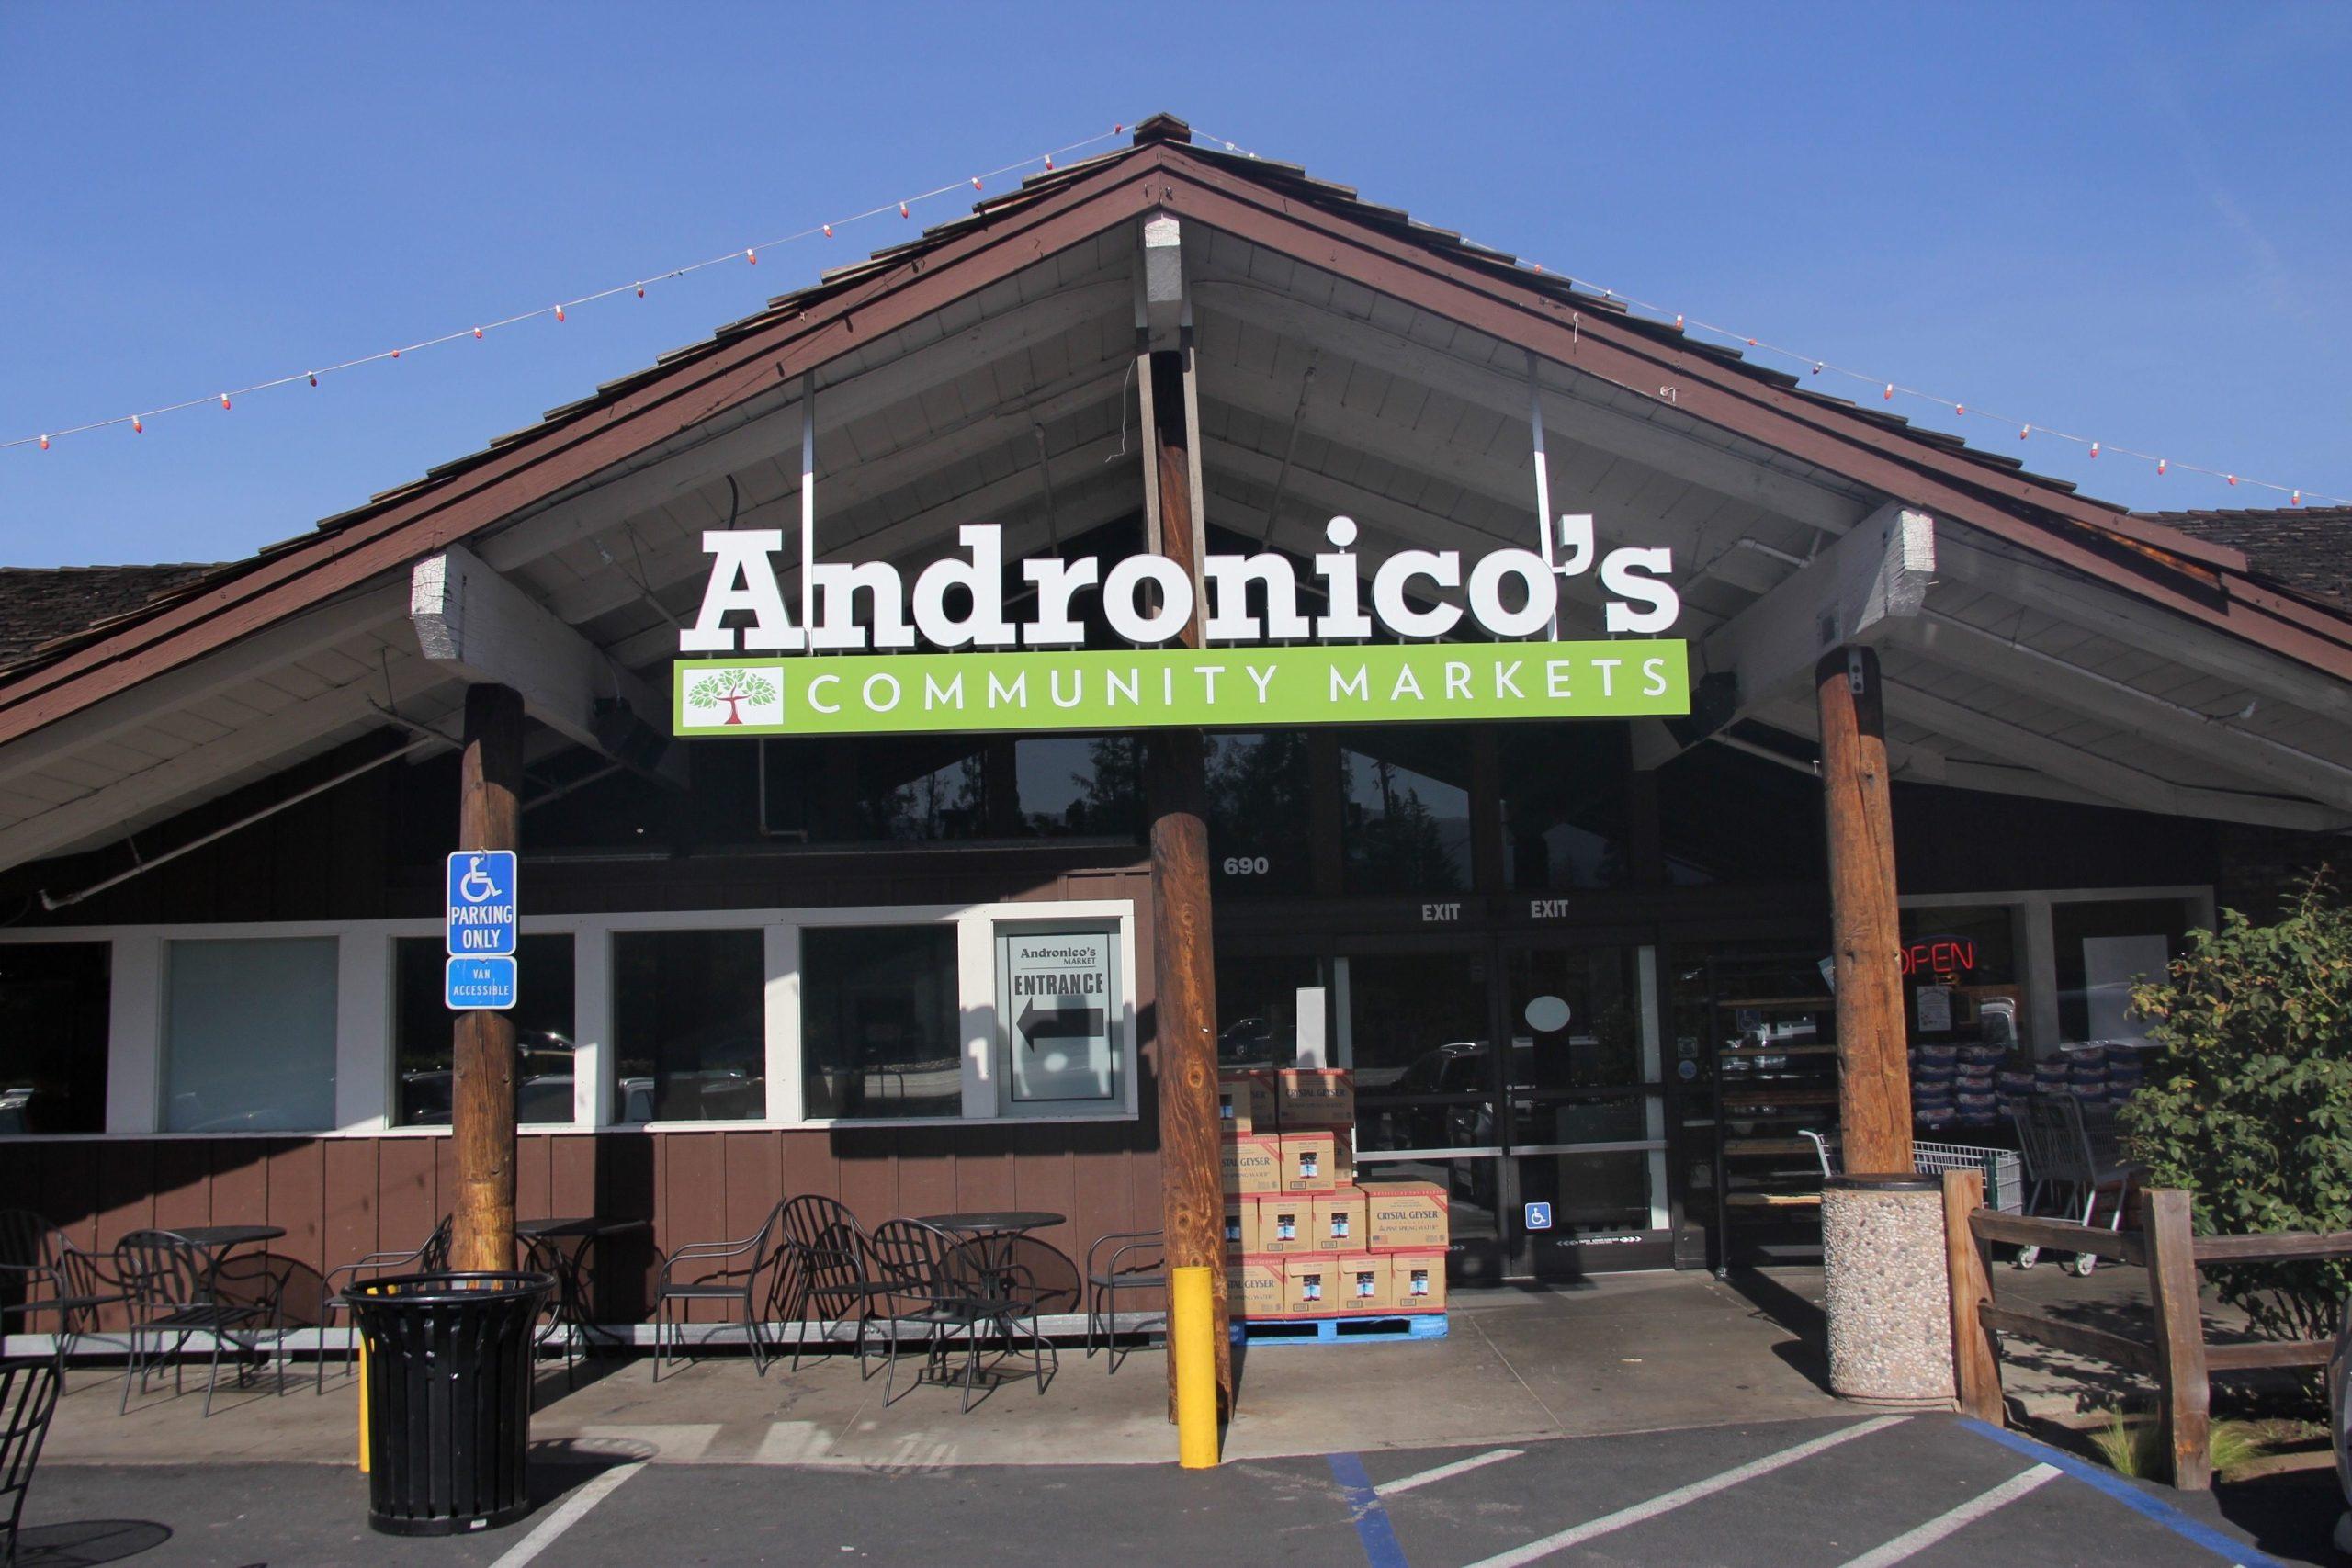 Andronicos Community Market plans to open new branch in Edgewood Plaza.